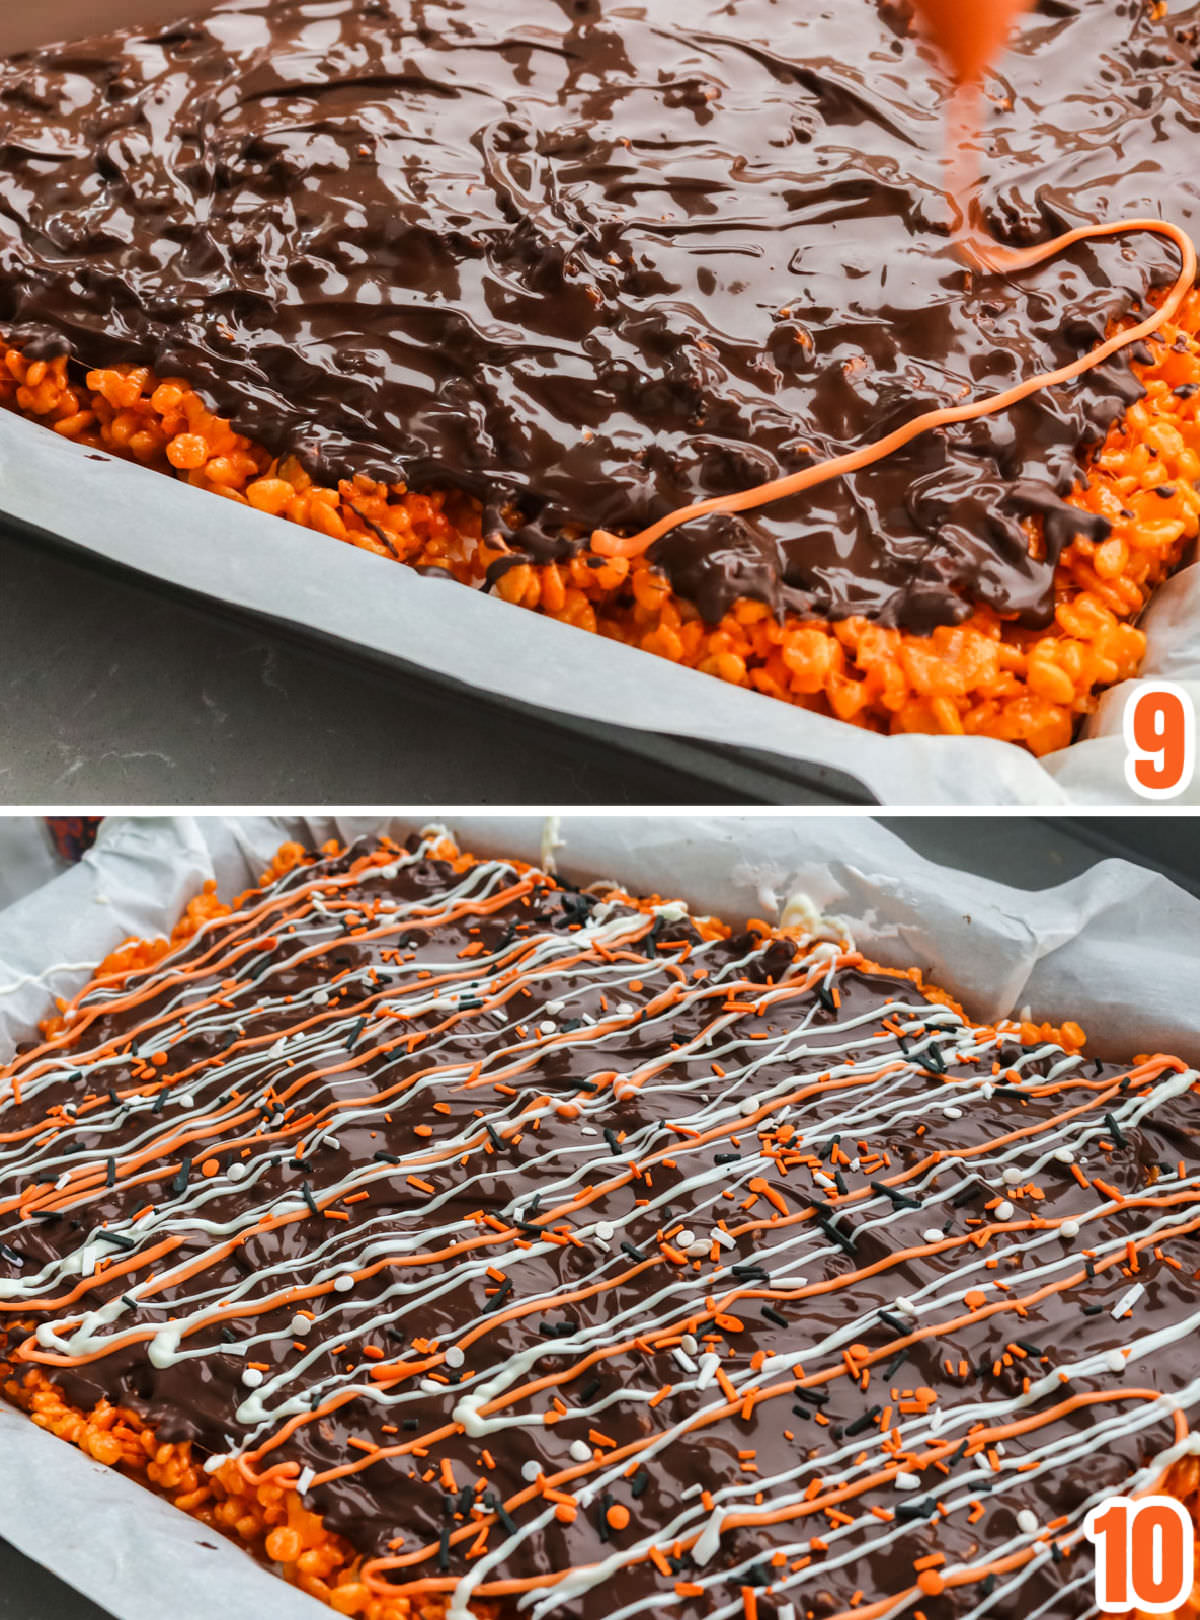 Collage image showing the steps for decorating the Brownie Rice Krispie Treats with Halloween colored swirls and sprinkles.